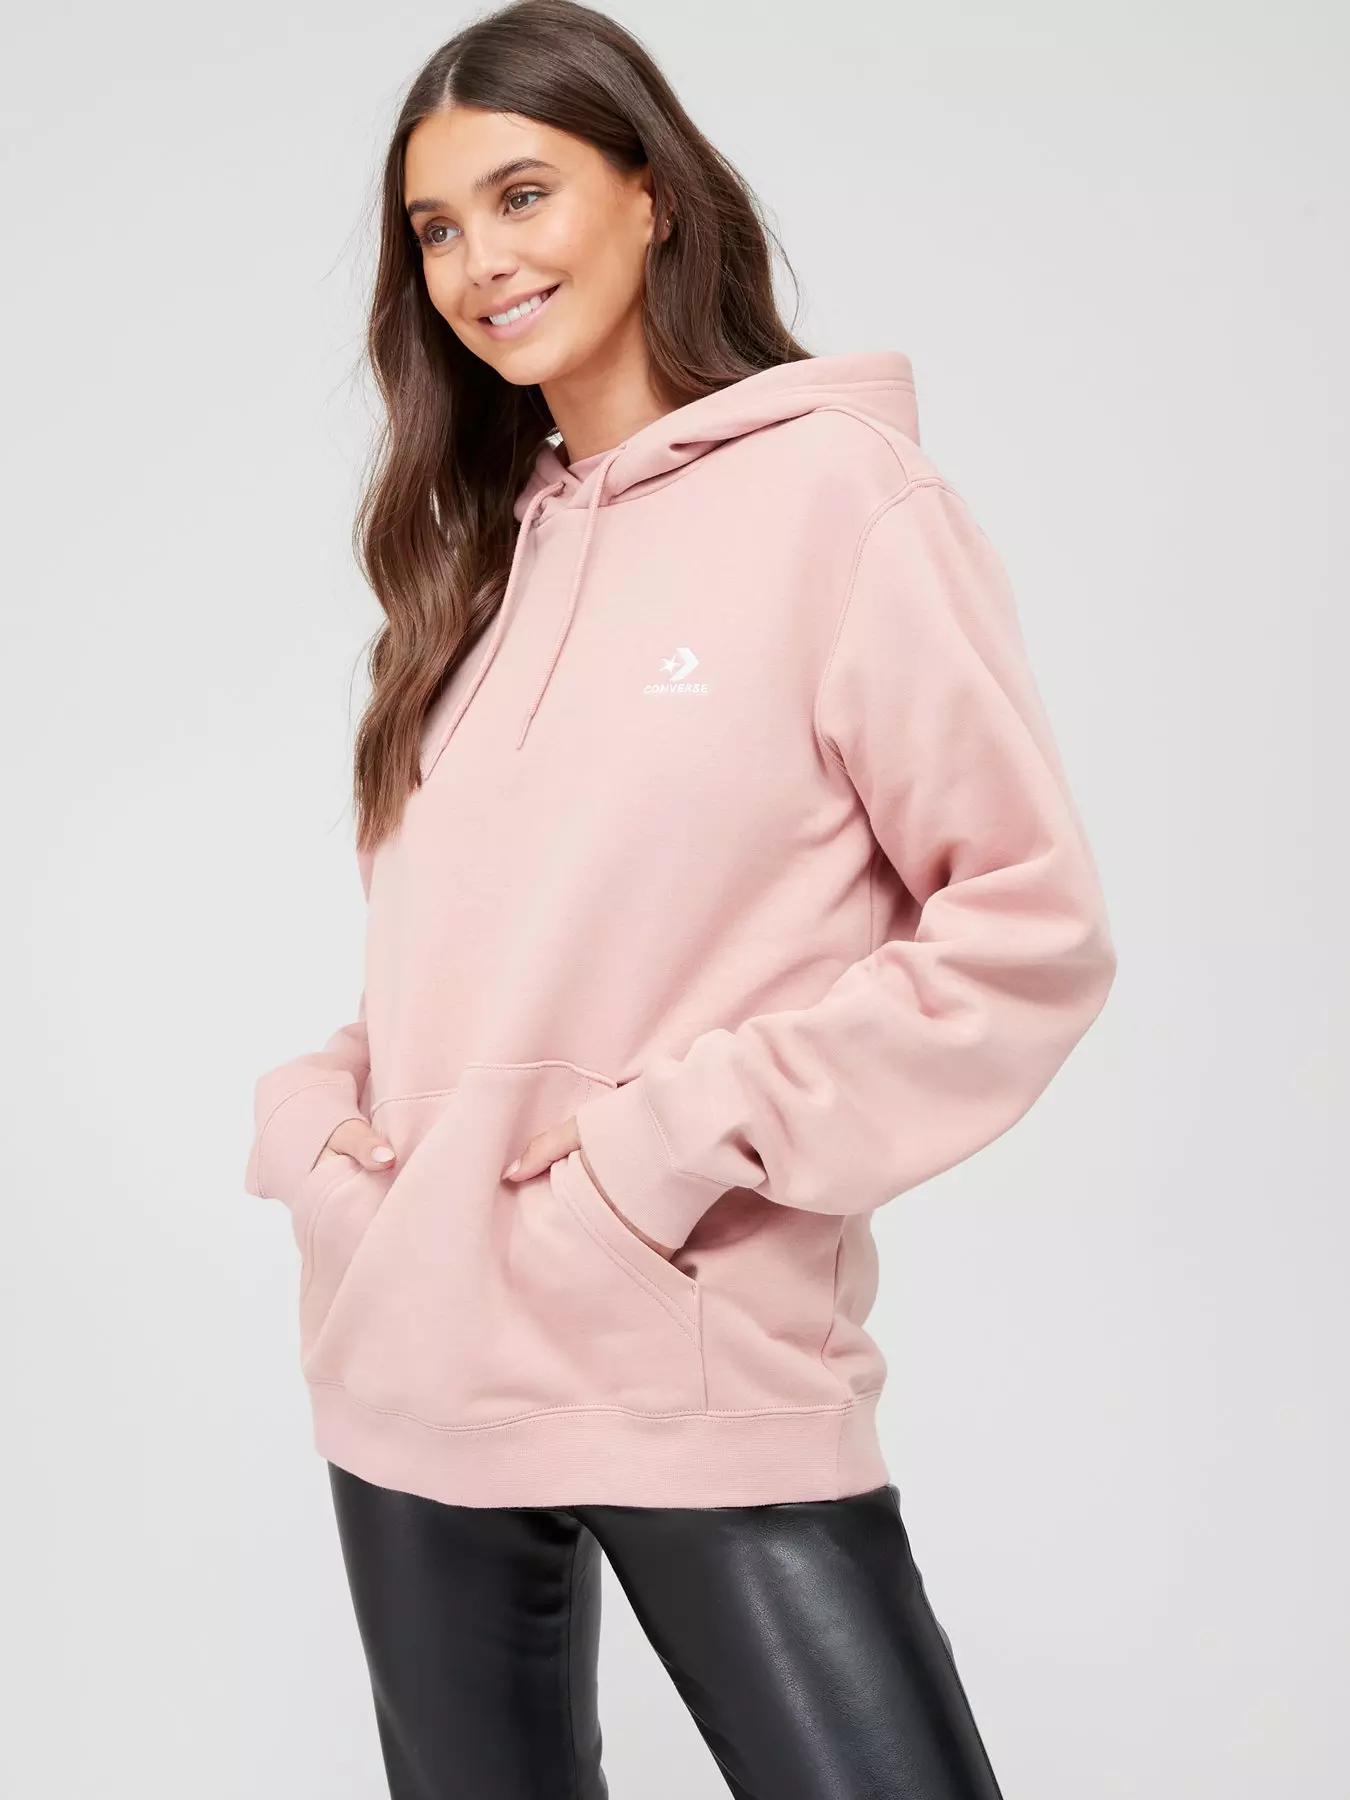 Converse Chevron Hoodie Star Pink - Embroidered